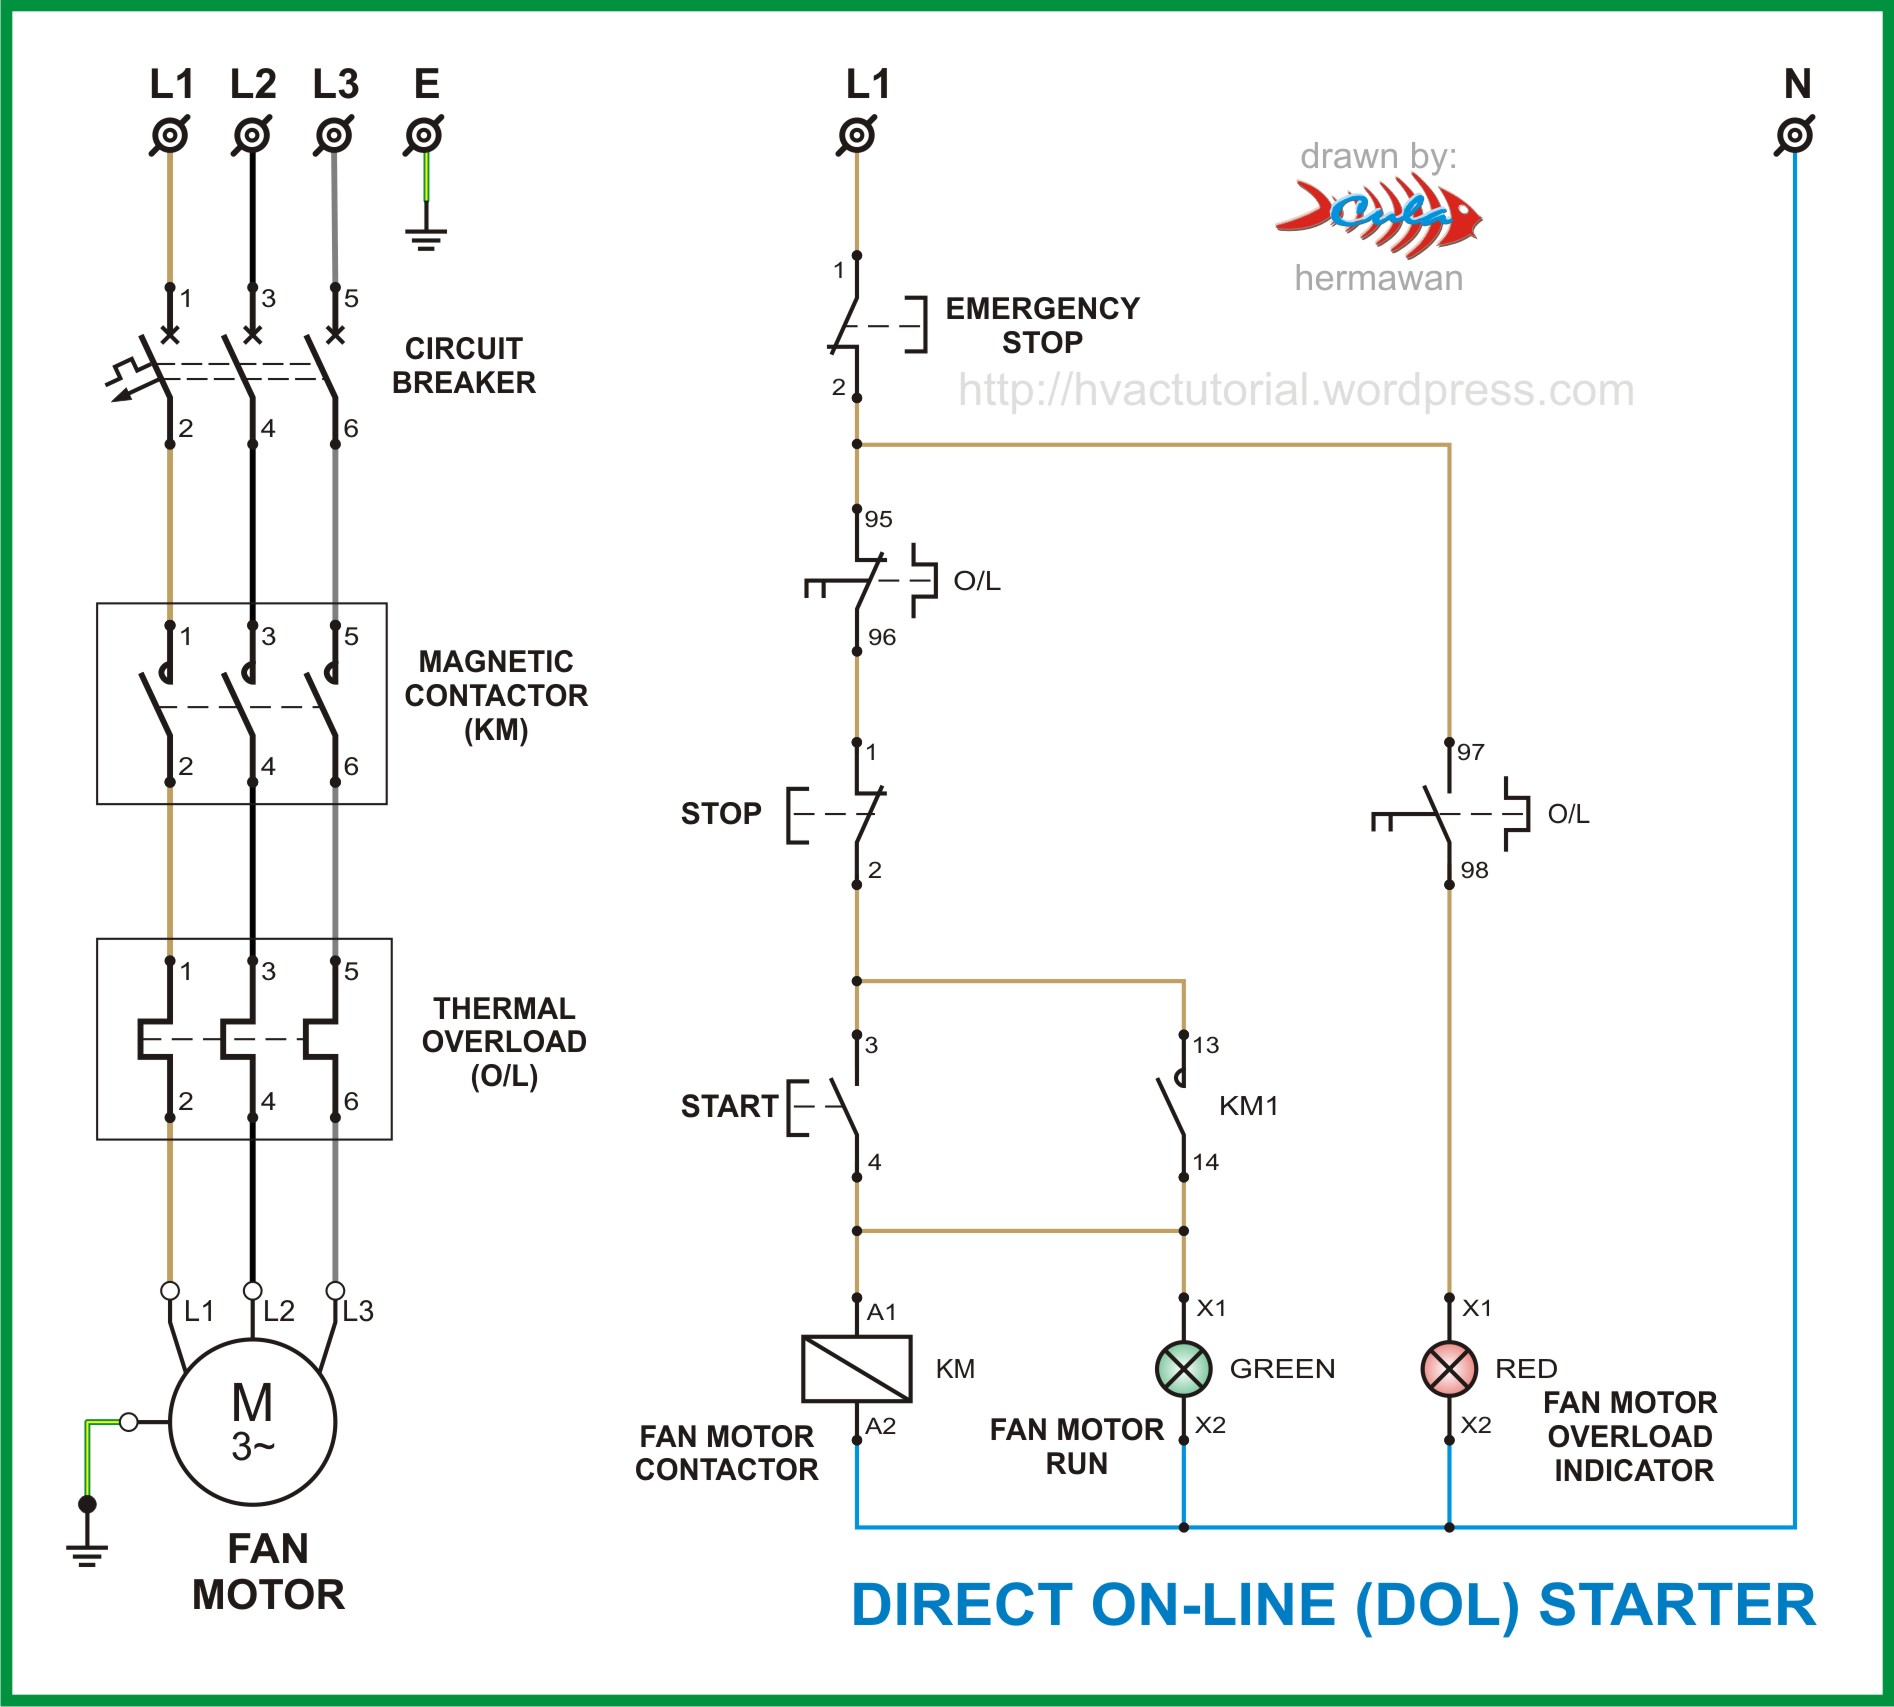 Timer And Contactor R Relay Diagram / Solid State Timer Wiring Diagram - Hanenhuusholli / This articles covers working and the relays and contactors: